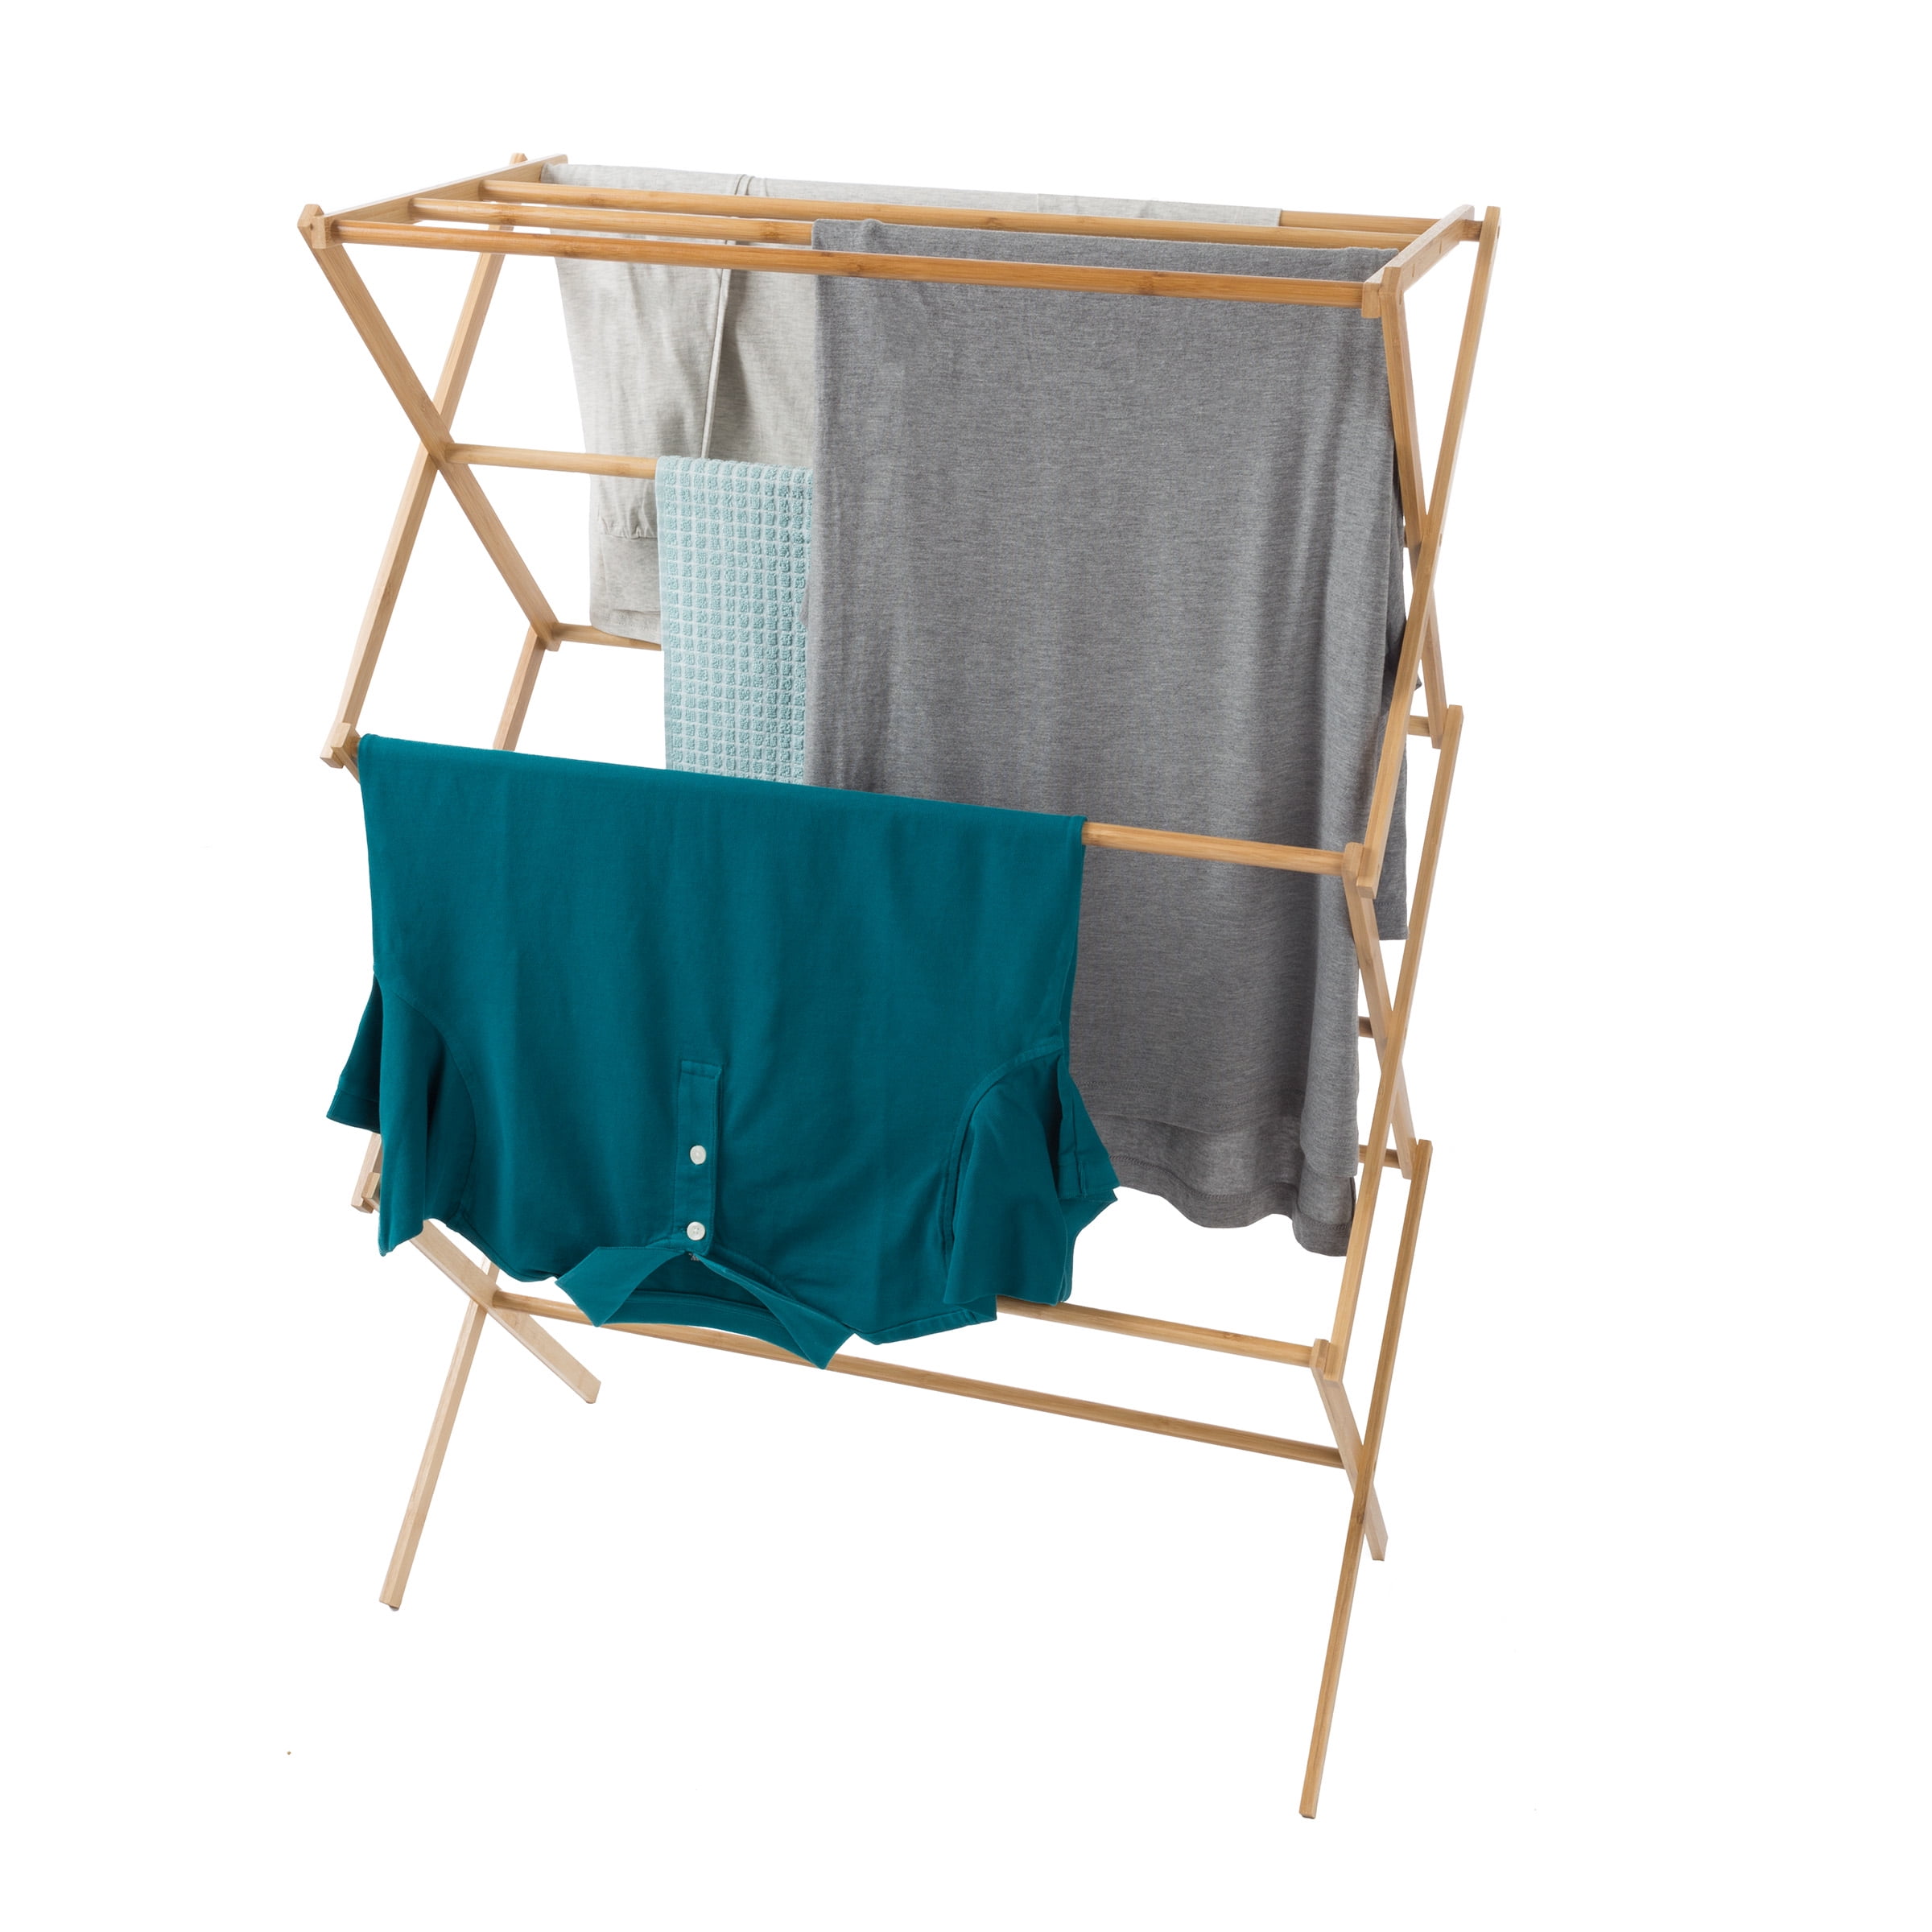 Portable Bamboo Clothes Drying Rack Collapsible and Compact for Indoor/Outdoor Use By Lavish